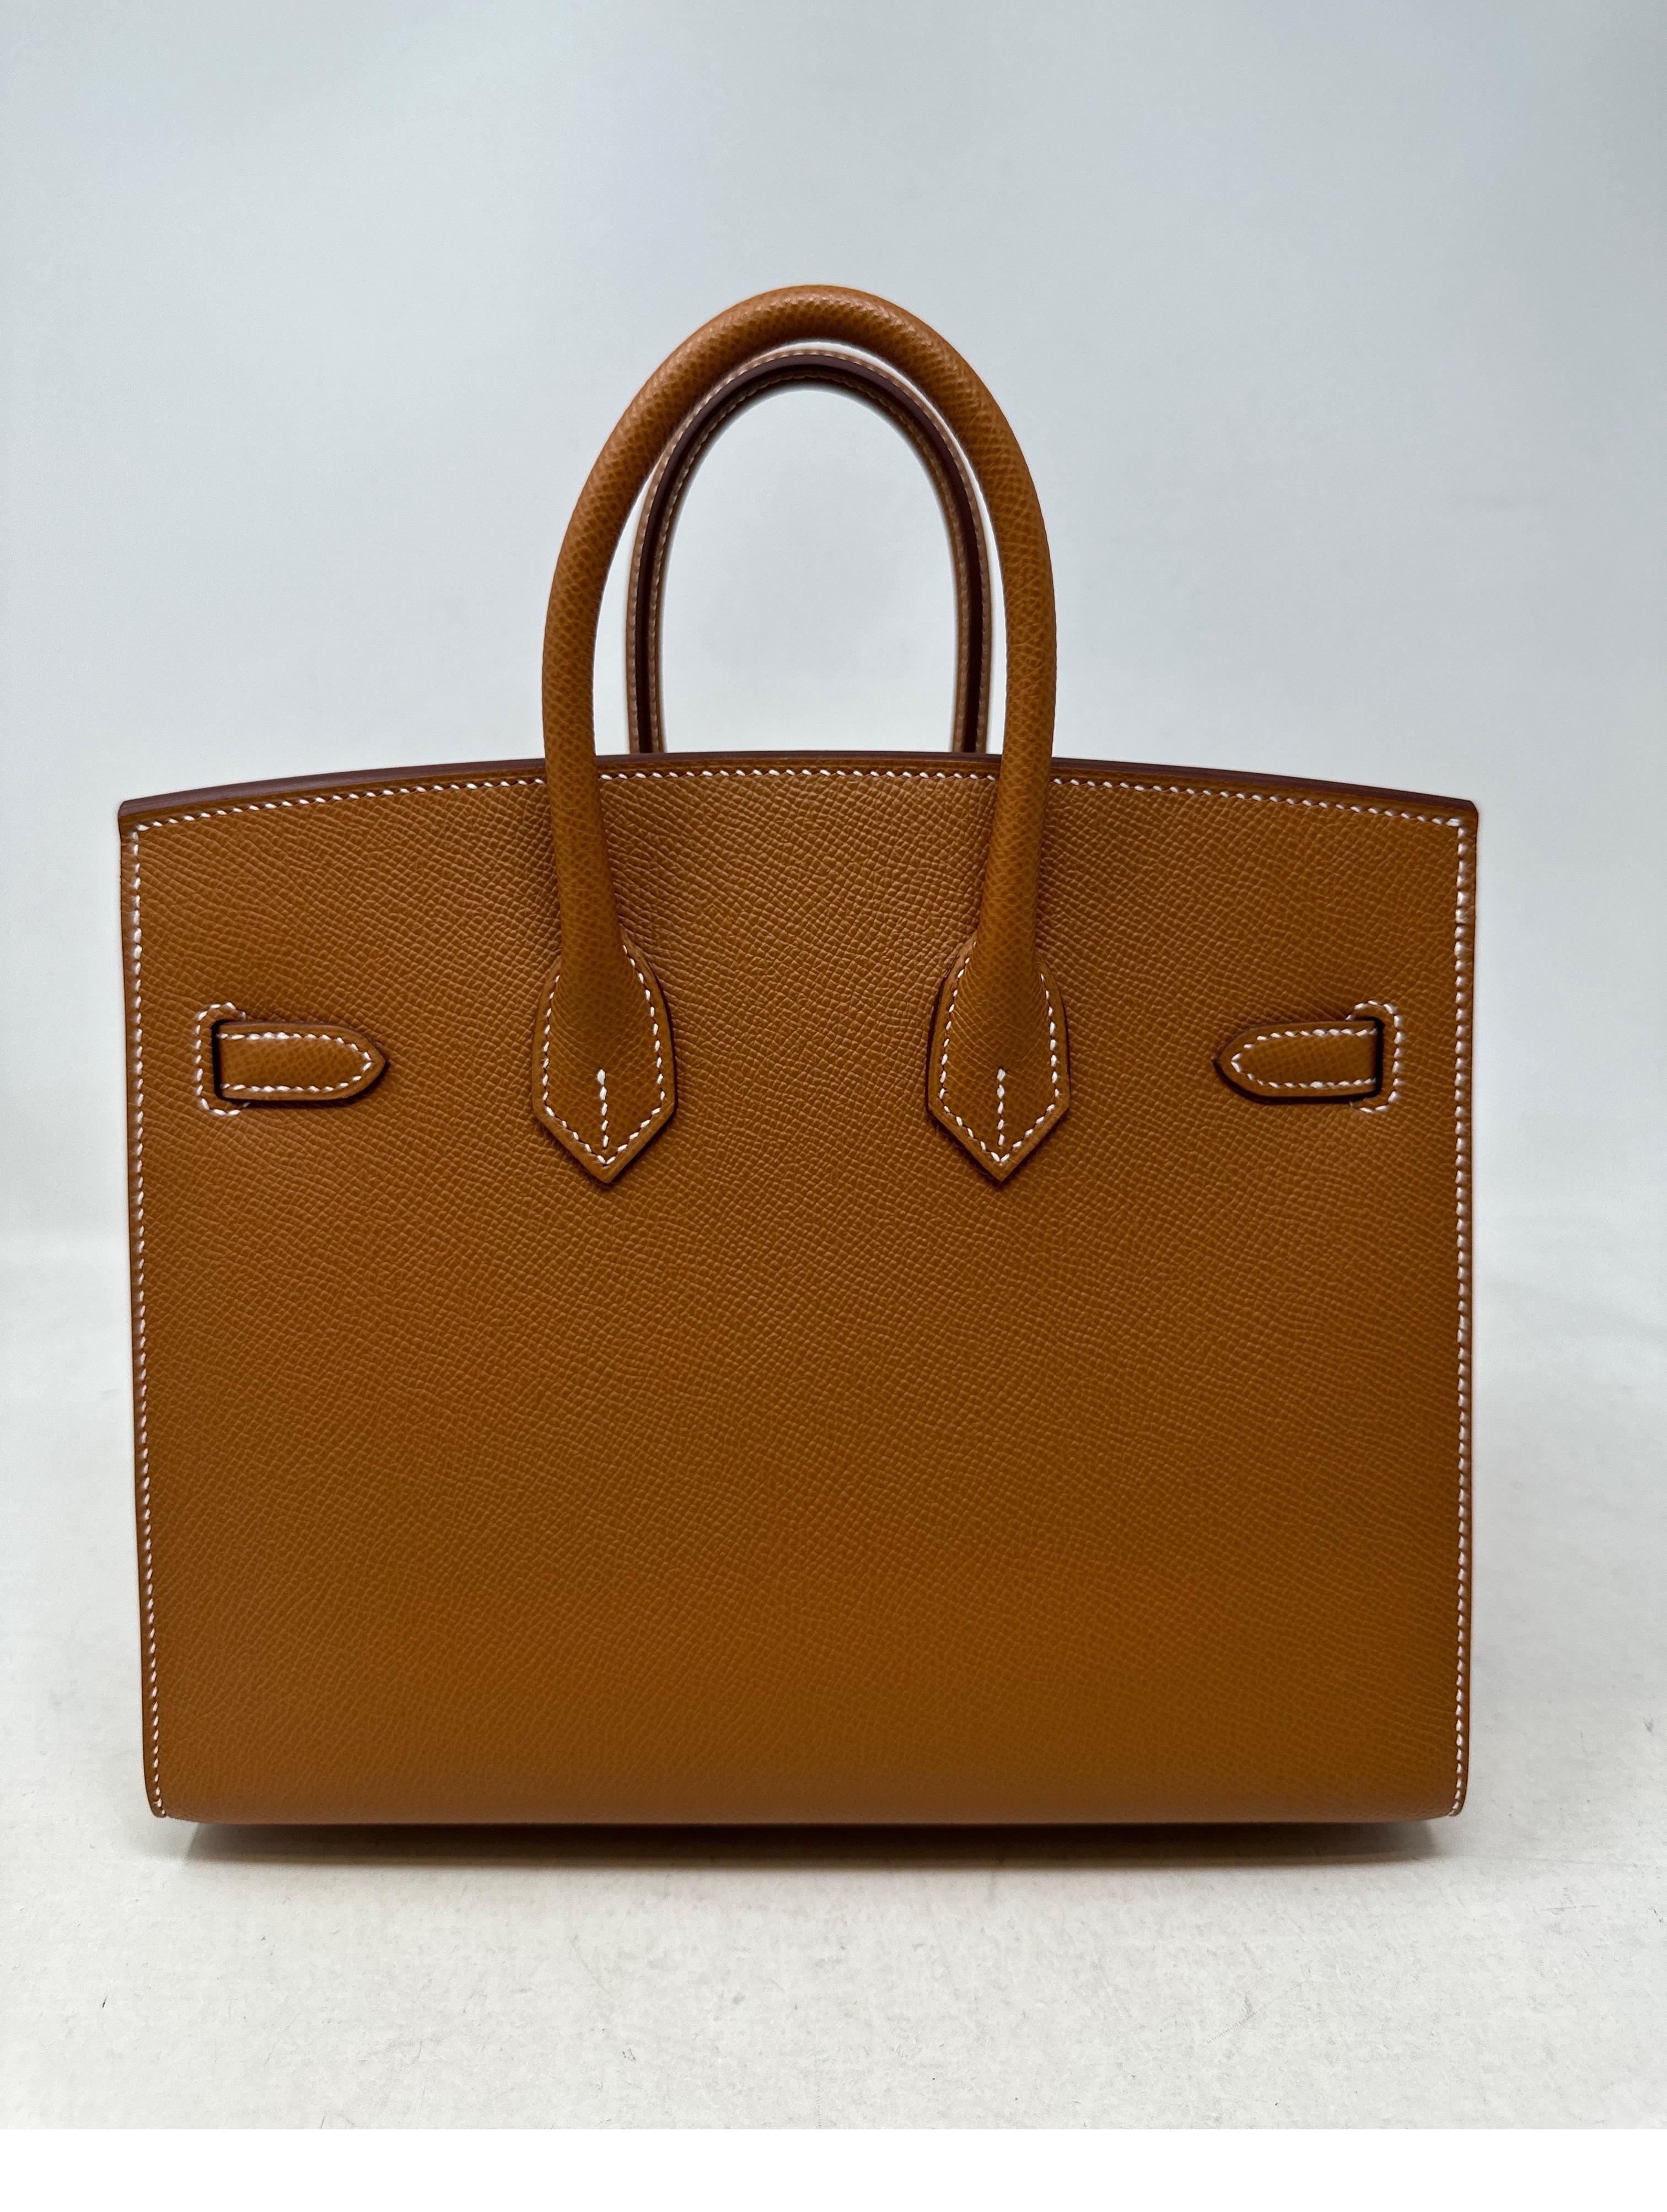 Hermes Gold Birkin 25 Bag  In New Condition For Sale In Athens, GA